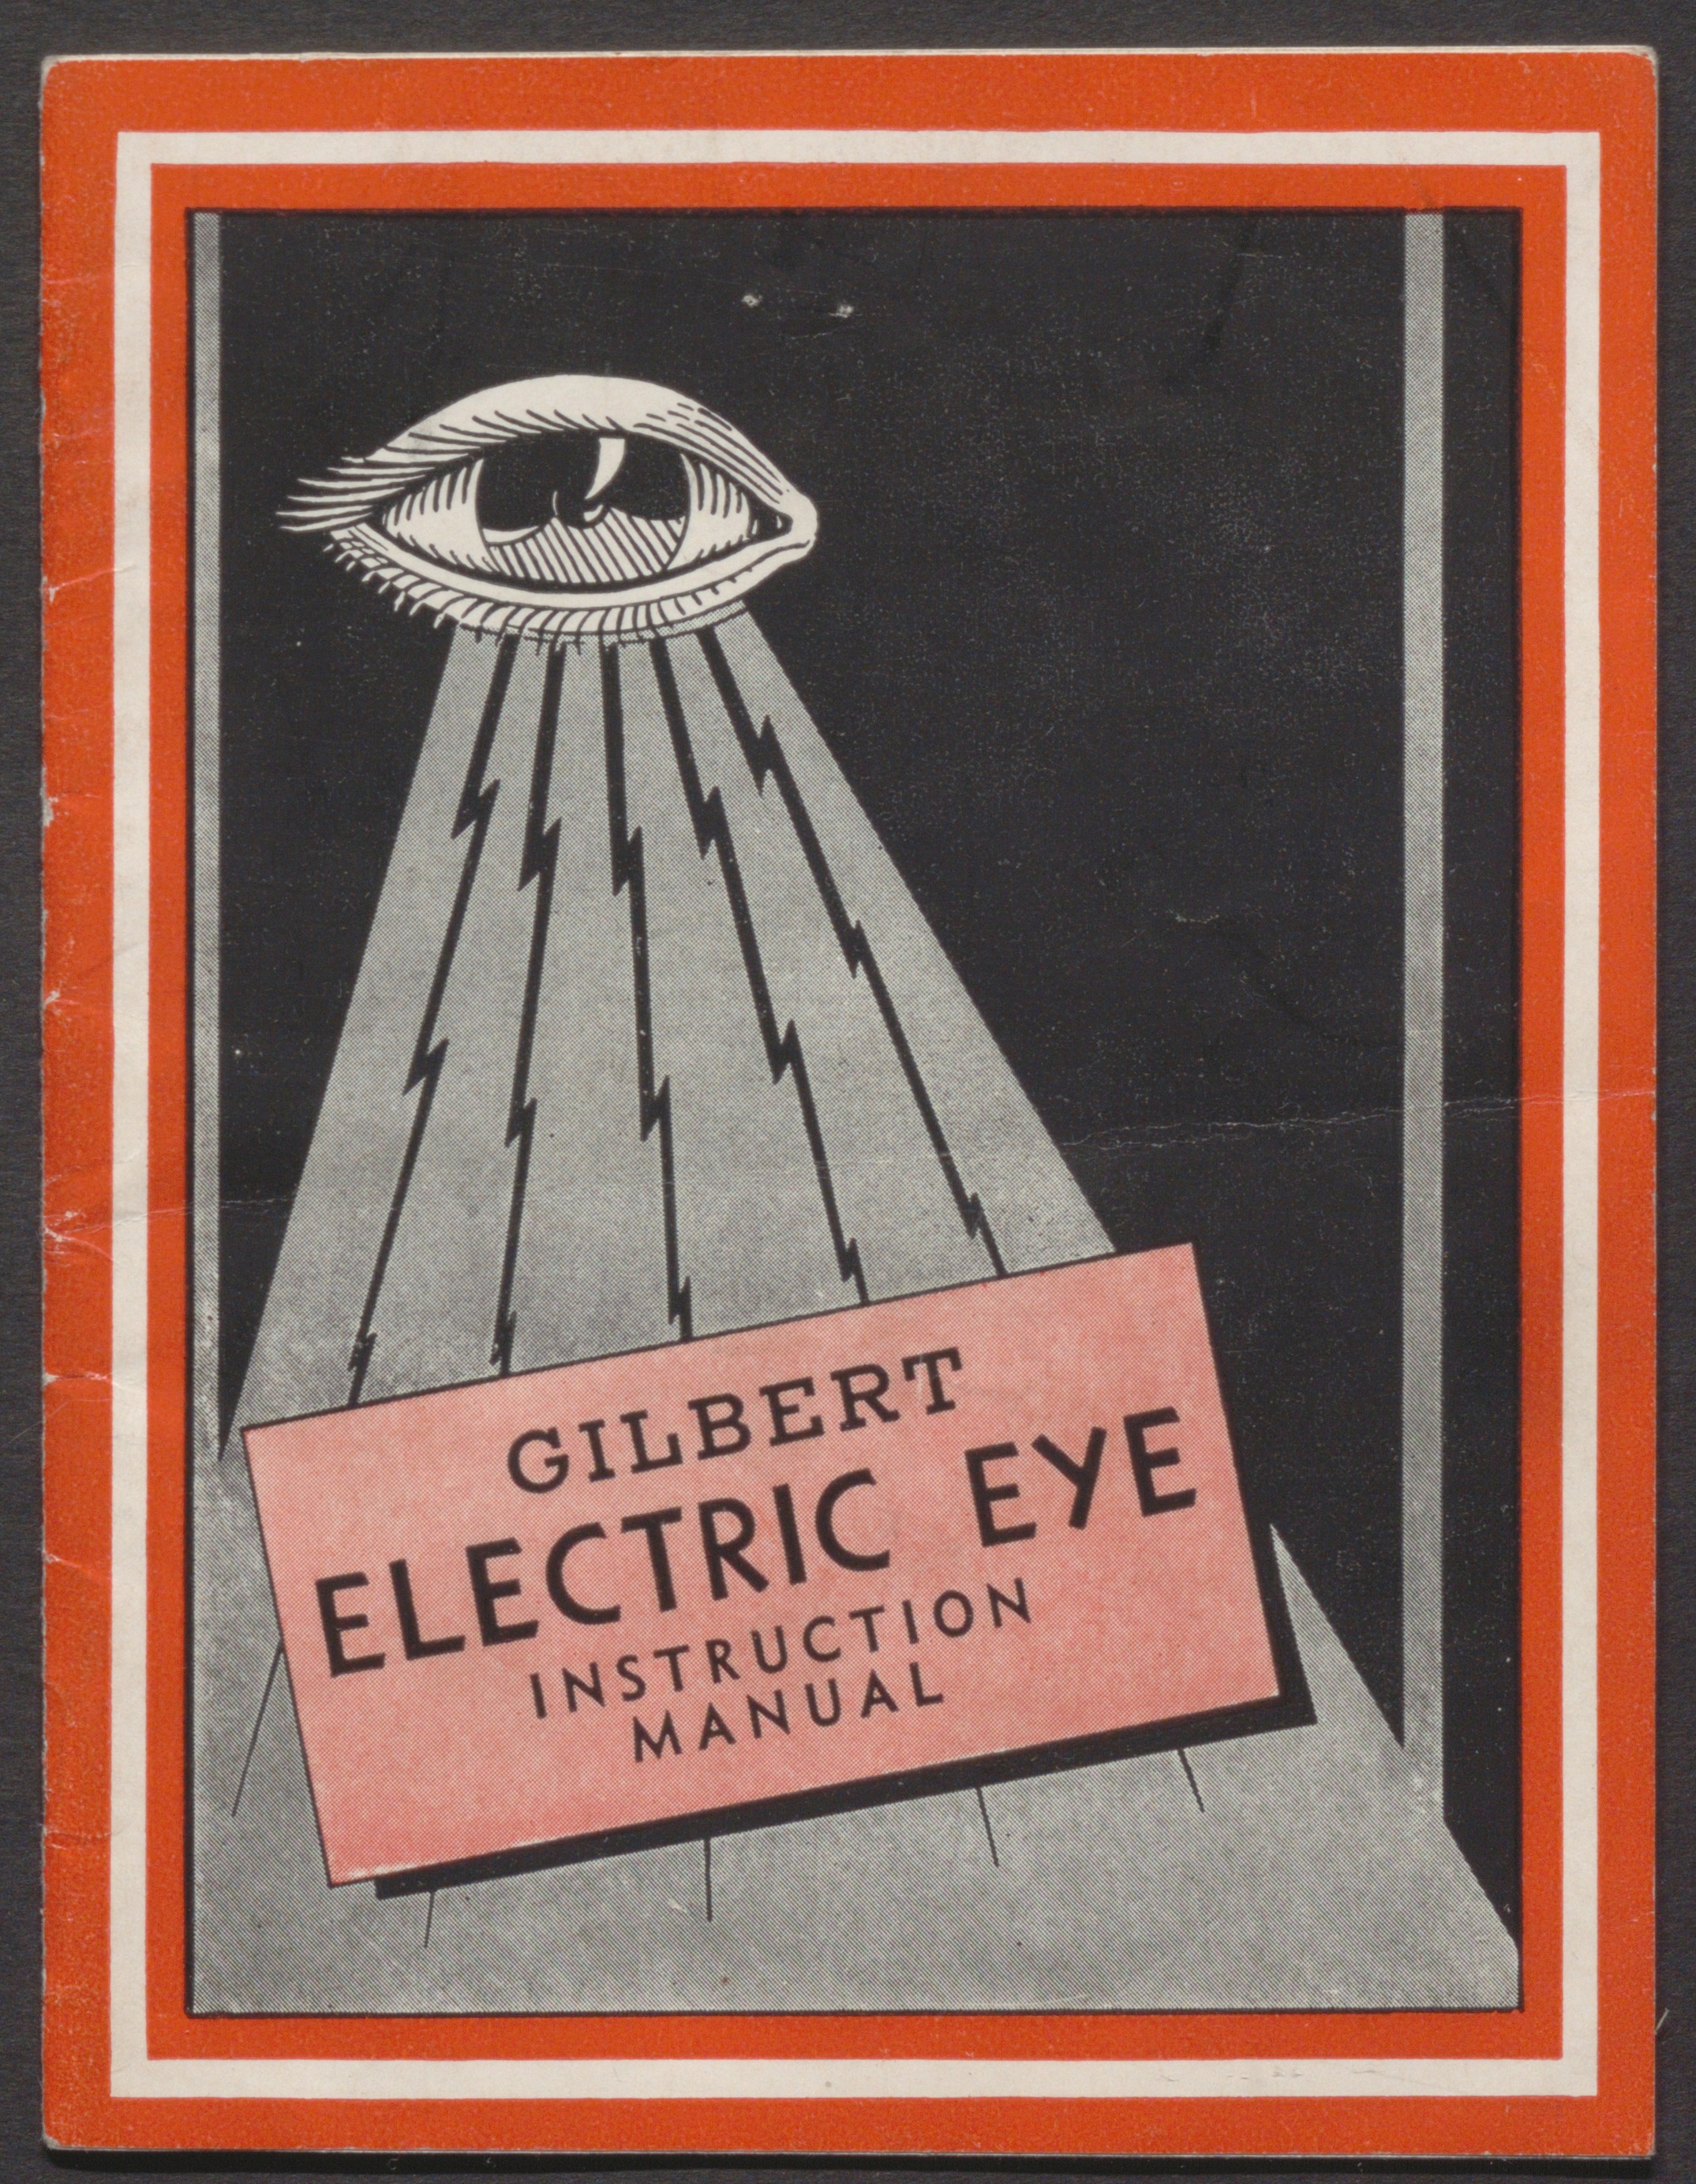 Pamphlet titled "Gilbert Electric Eye Instruction Manual", drawing of an eye beaming electricity